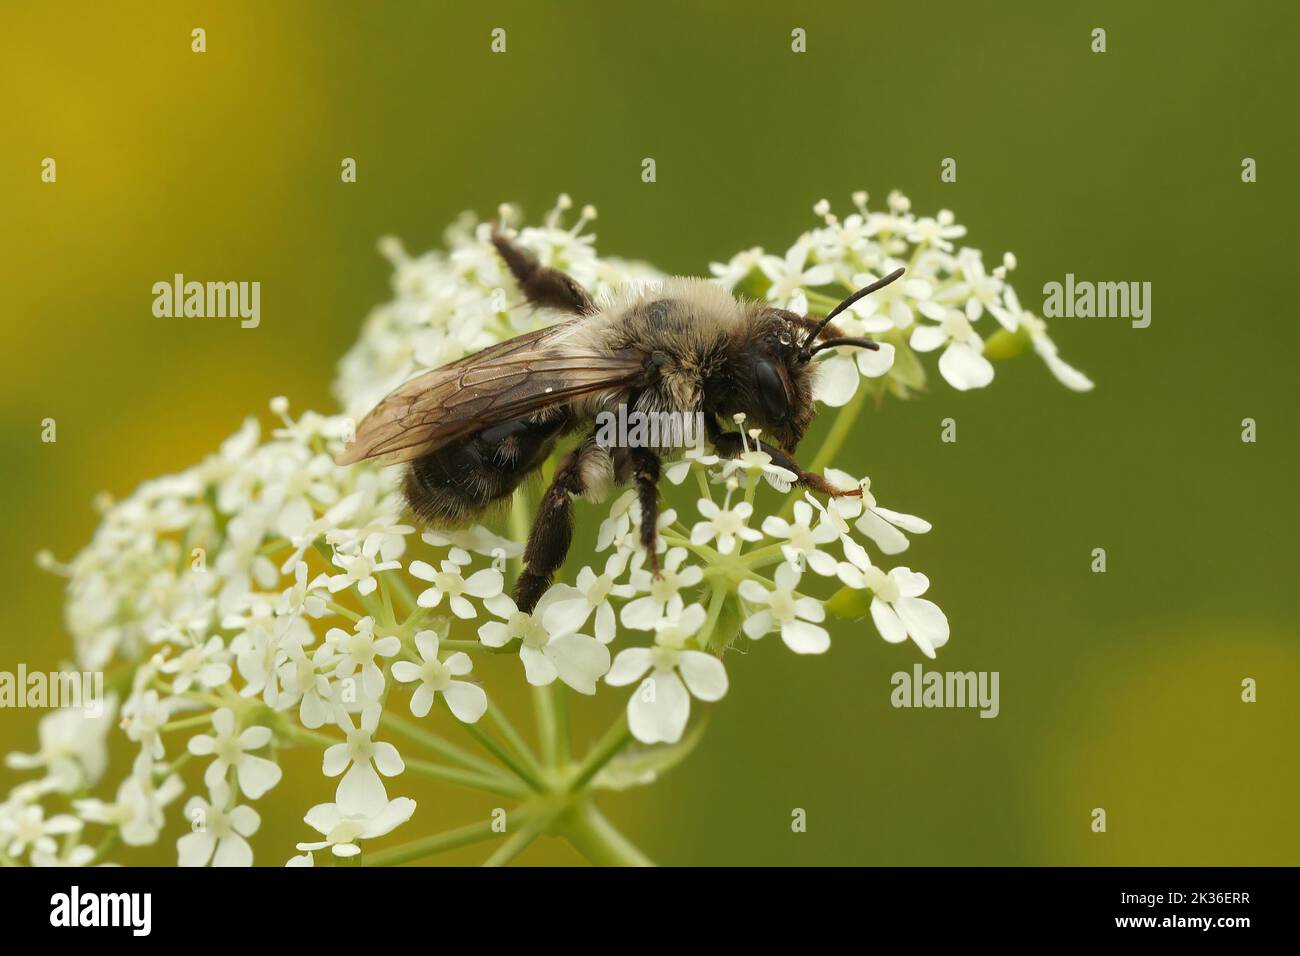 Closeup on a furre white female Grey-backed mining bee, Andrena vaga, sitting on top of a flower against a green background Stock Photo